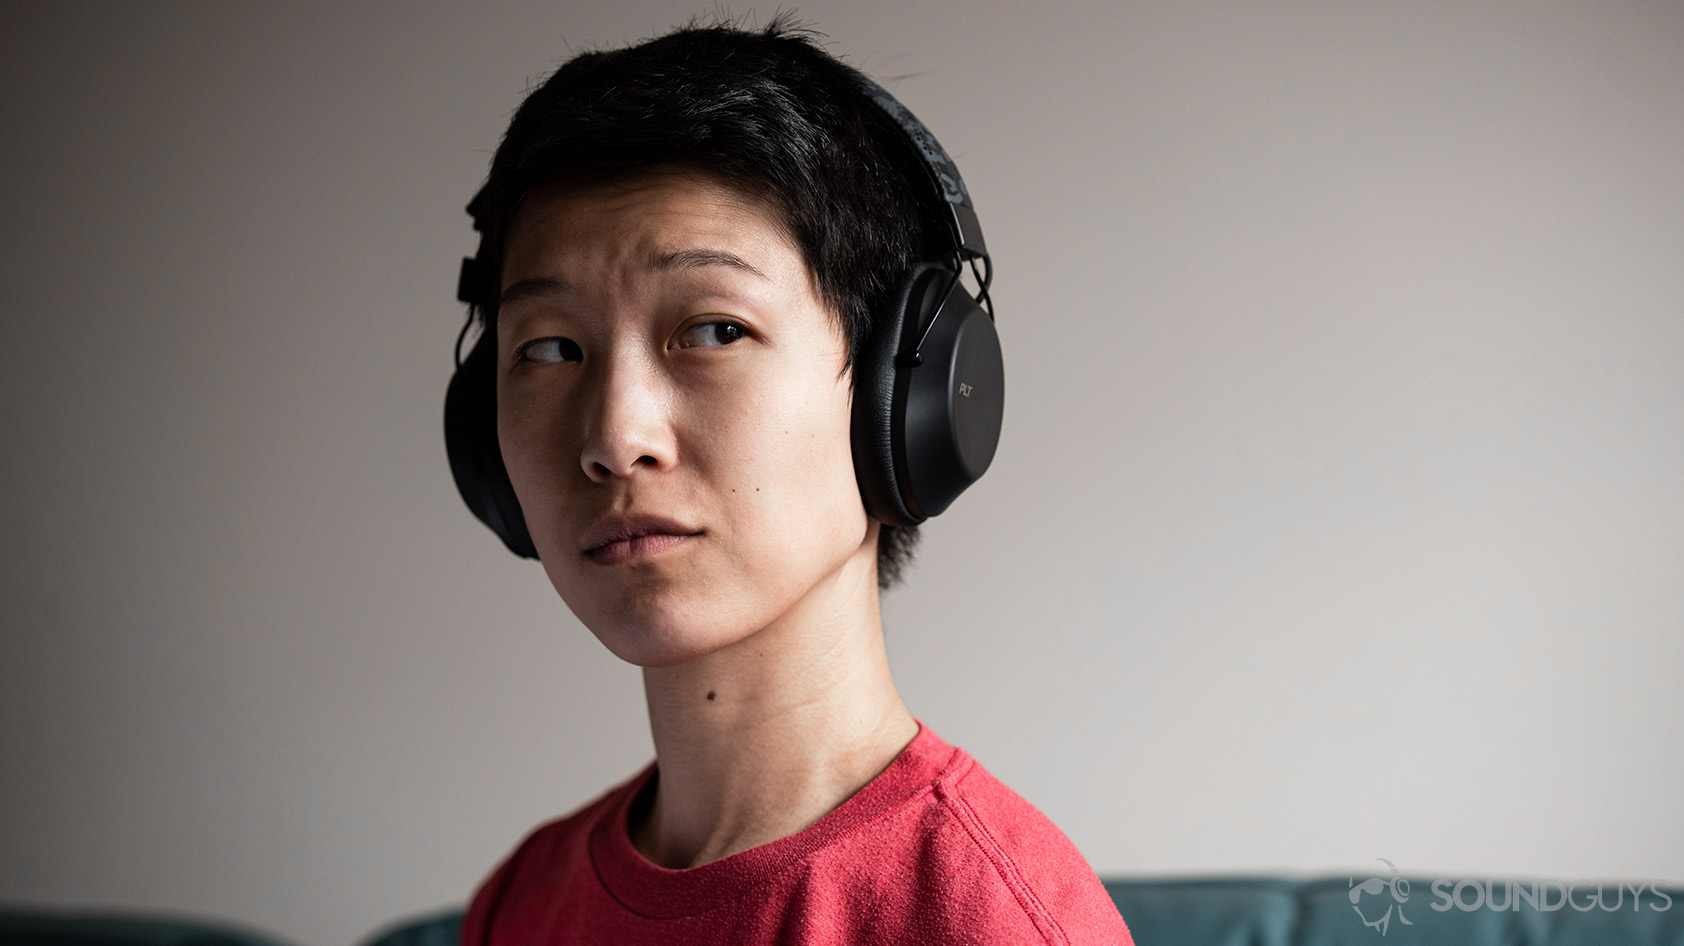 A woman wears the Plantronics BackBeat Fit 6100 workout headphones against an off-white wall.